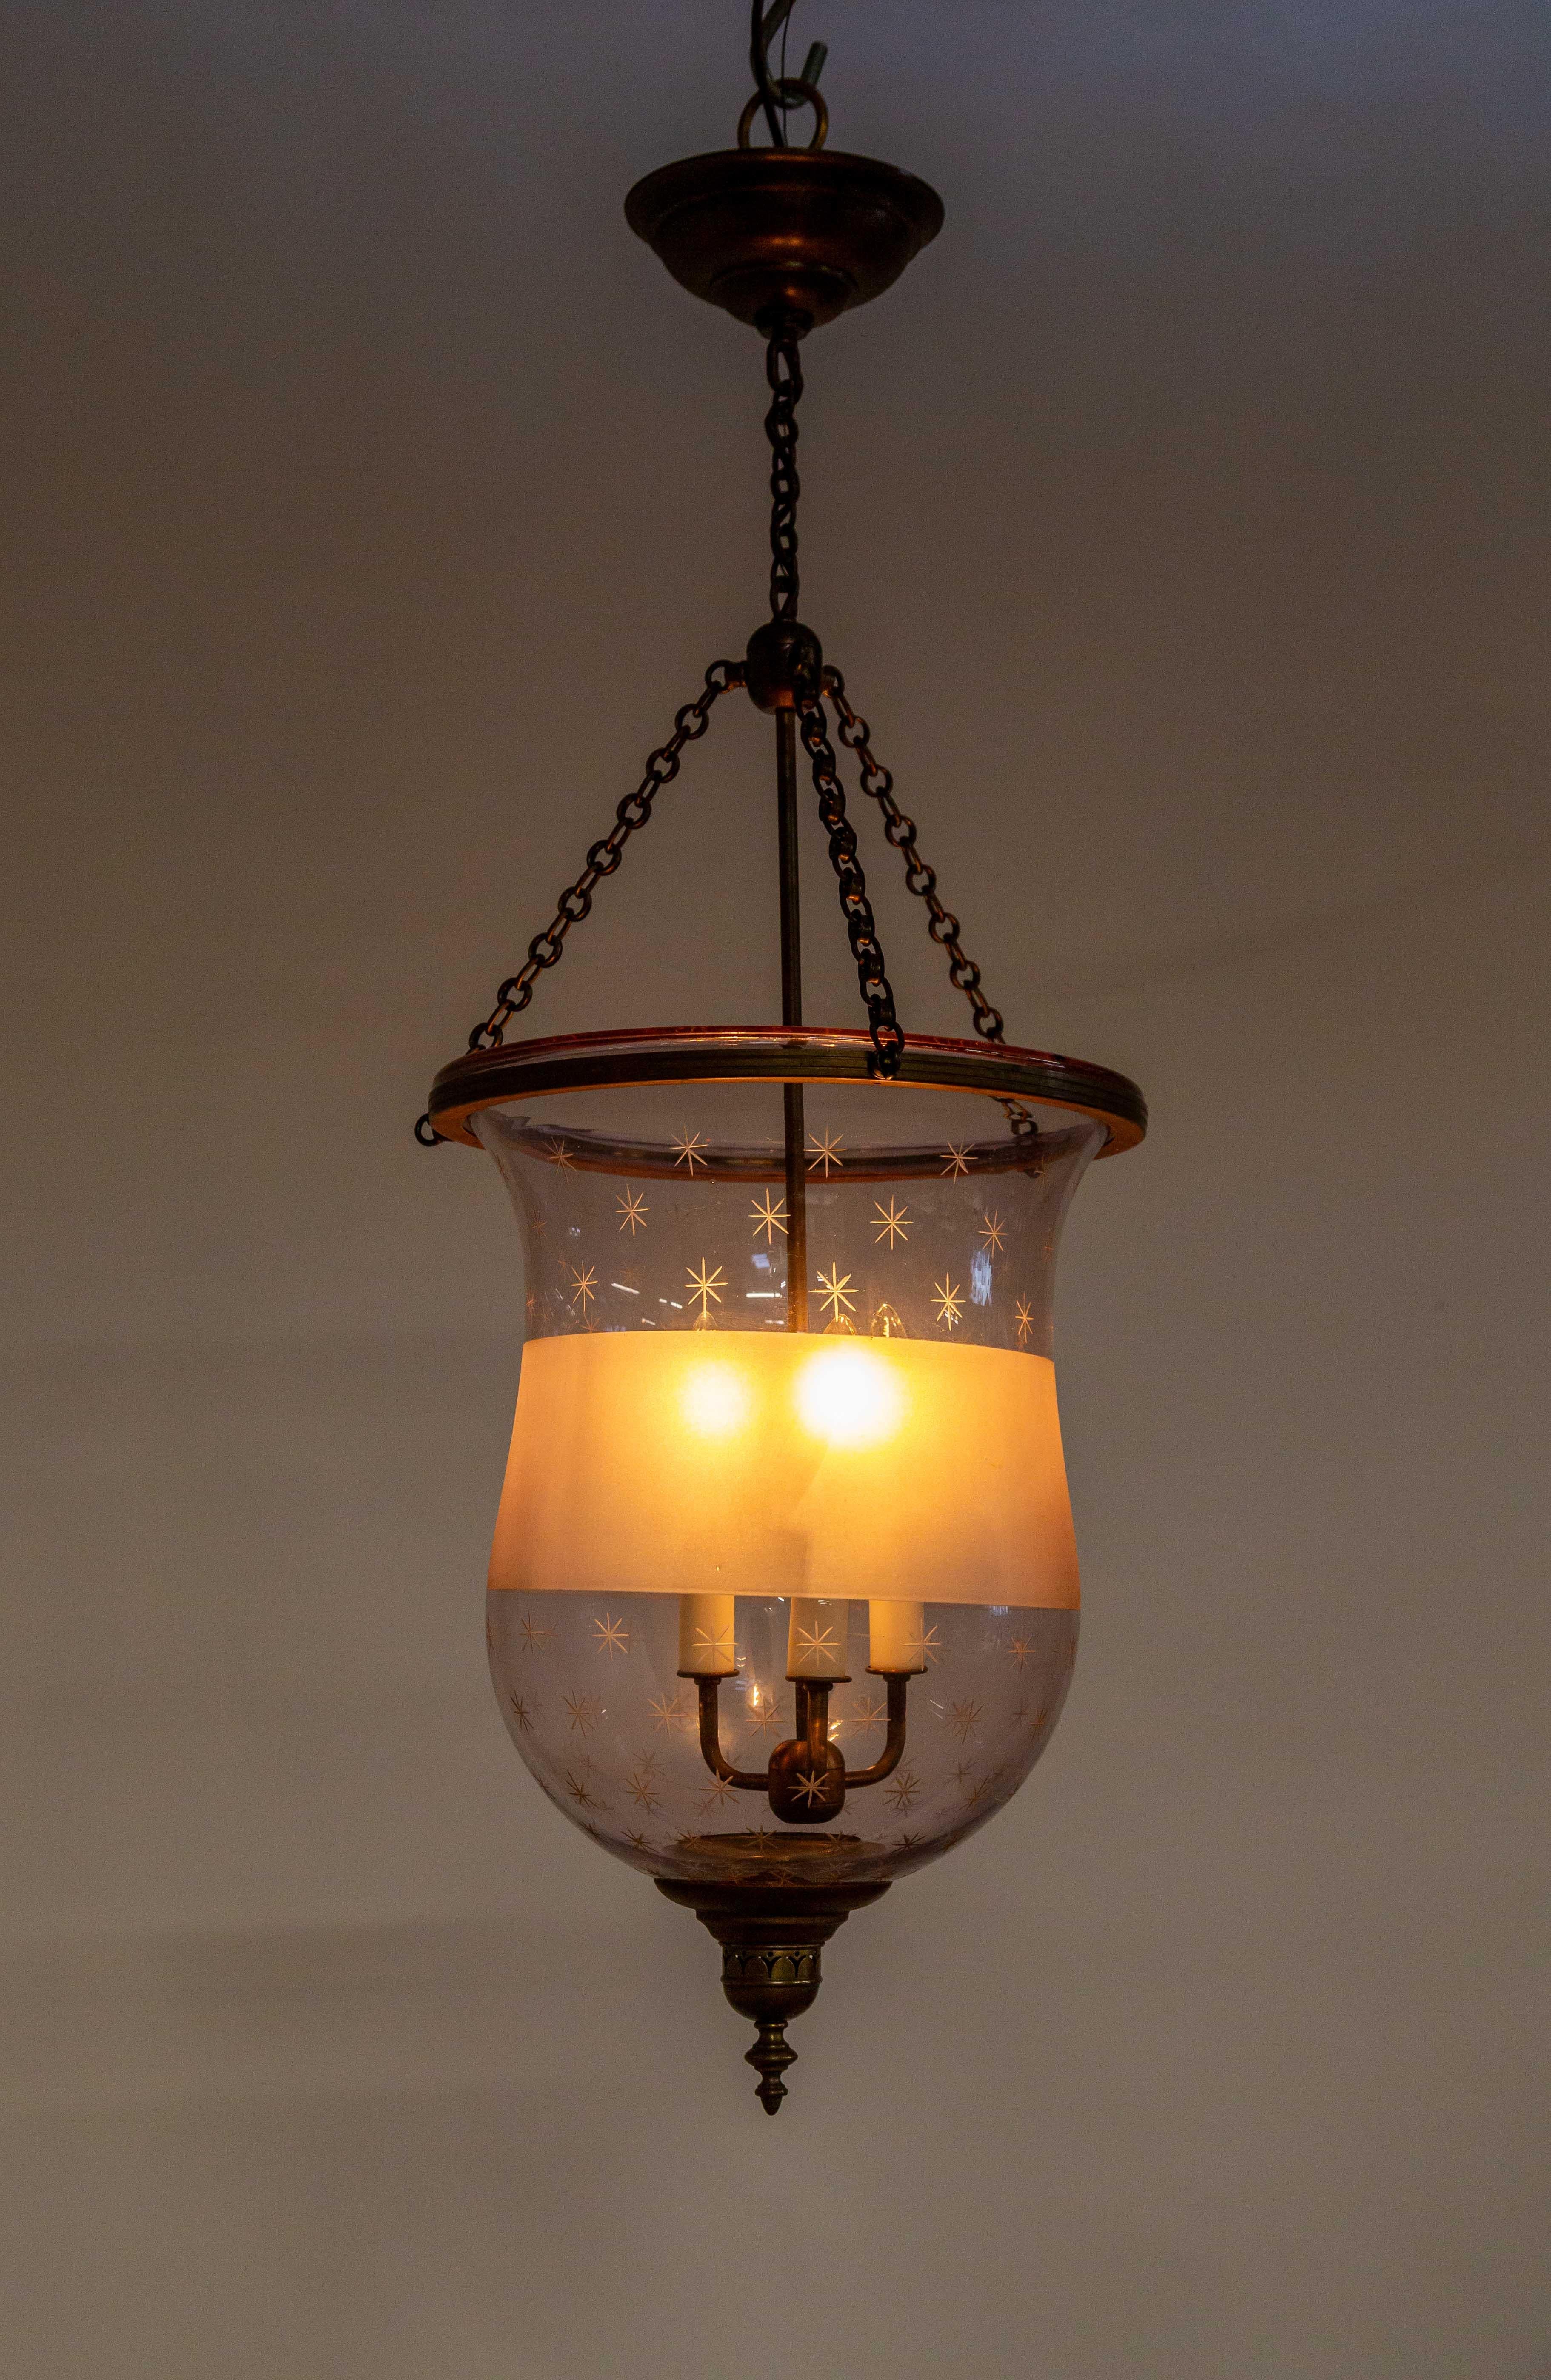 A unique bell jar lantern in late 19th century, amethyst glass with hand engraved stars and a frosted band that diffuses the light magnificently. Newly made with three candlestick lights, bottom finial, stem and chains. 14